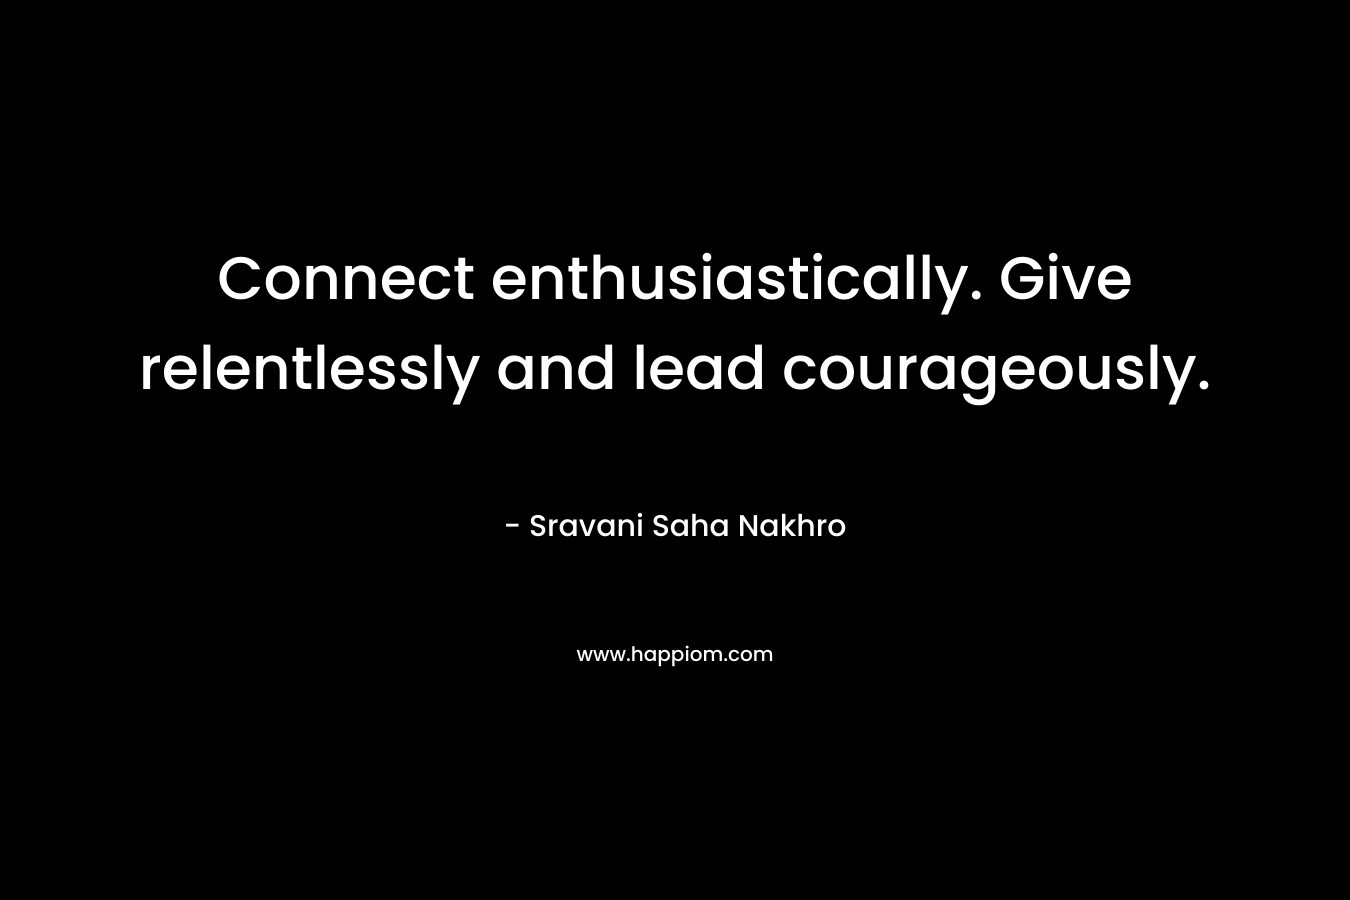 Connect enthusiastically. Give relentlessly and lead courageously.